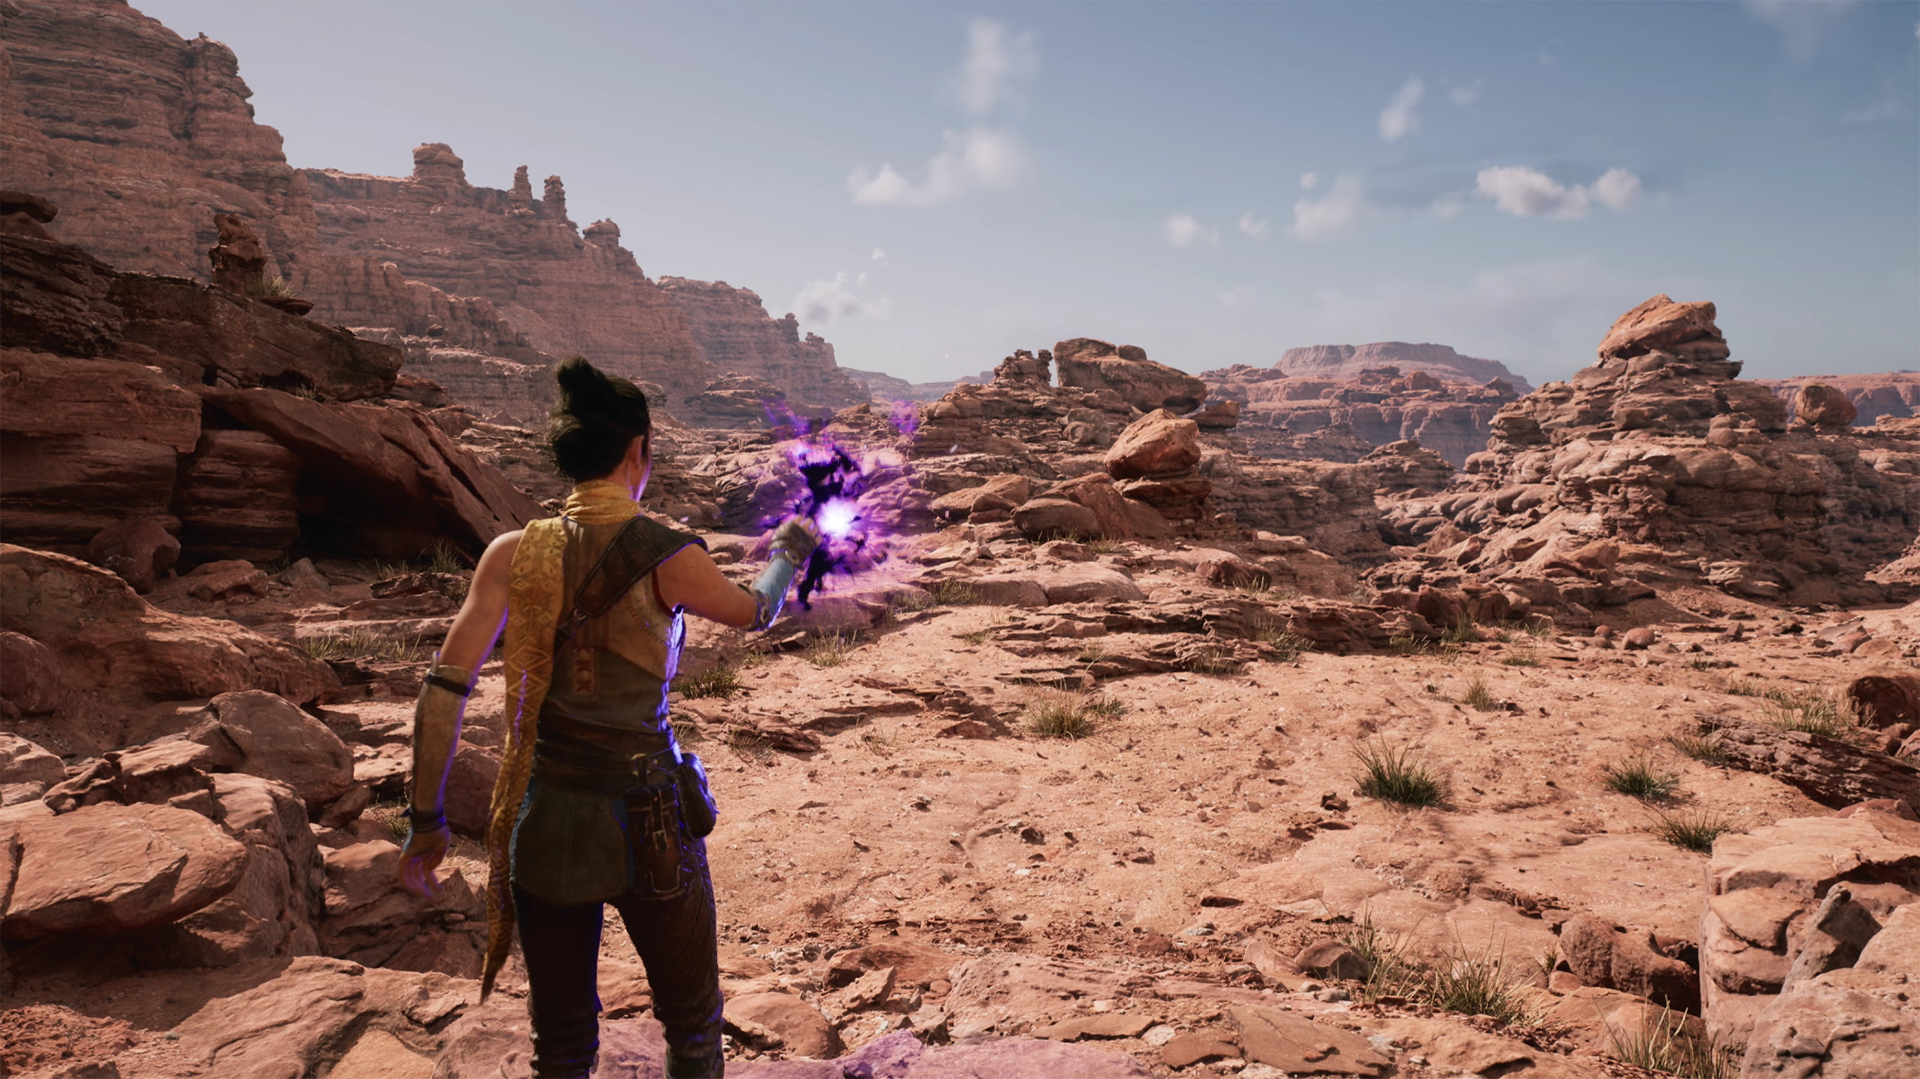 Unreal Engine 5 super resolution feature promises near 4K quality 'at the cost of 1080p'